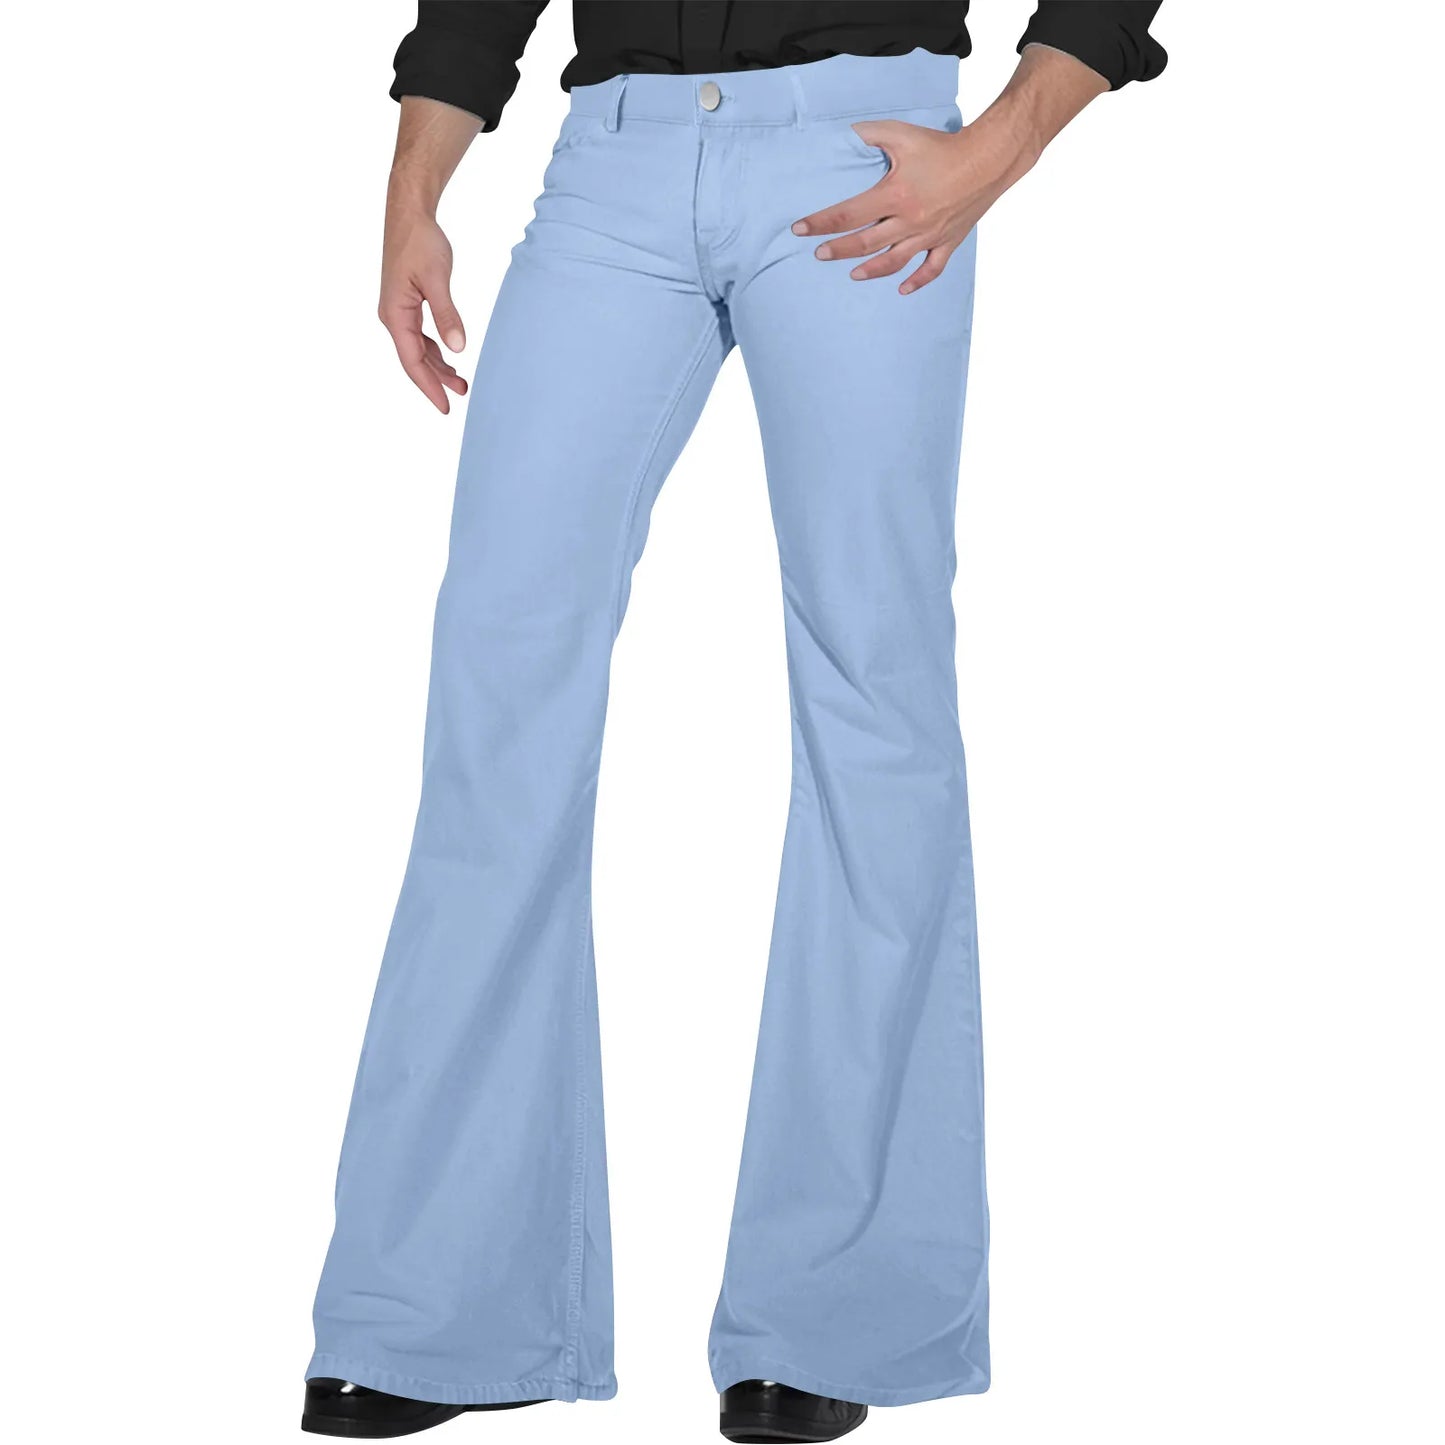 Men'S Retro Disco Flared Pants Loose Stretch Vintage Trousers